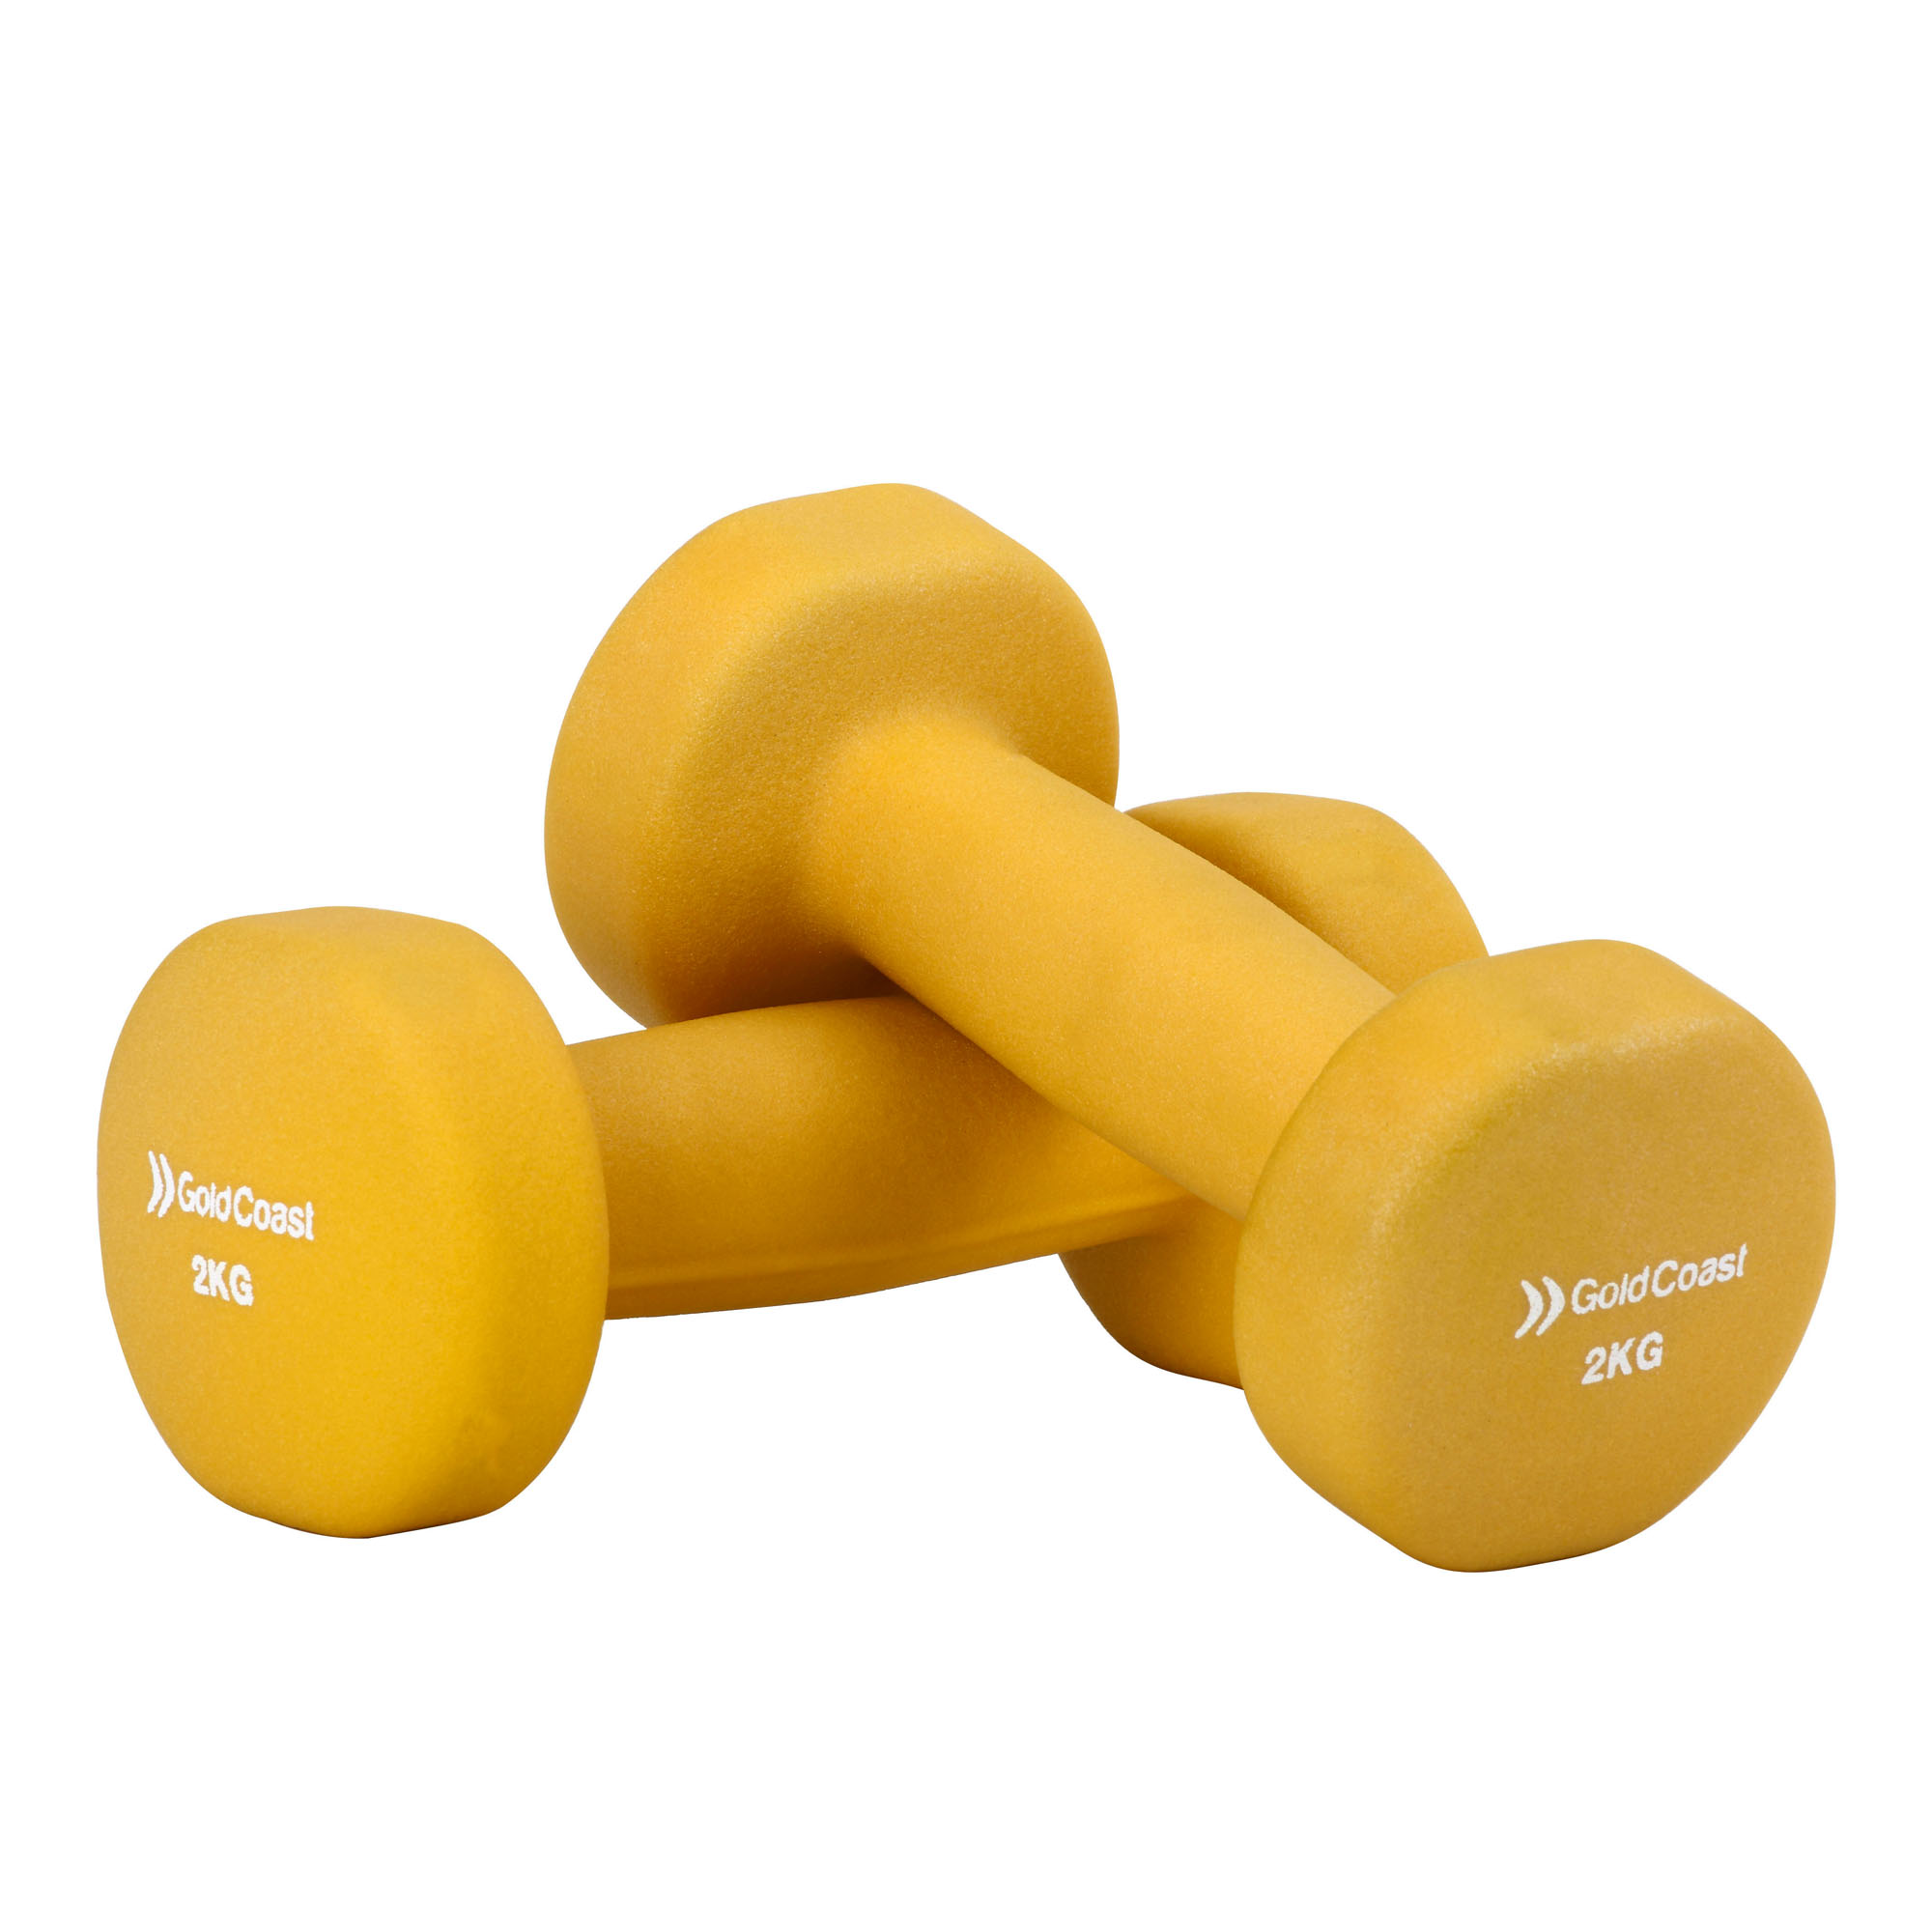 Free Weights for Strength Training in the Gym or Home Fitness Gold Coast 12kg Neoprene Dumbbell Set with Rack Storage Stand Included 